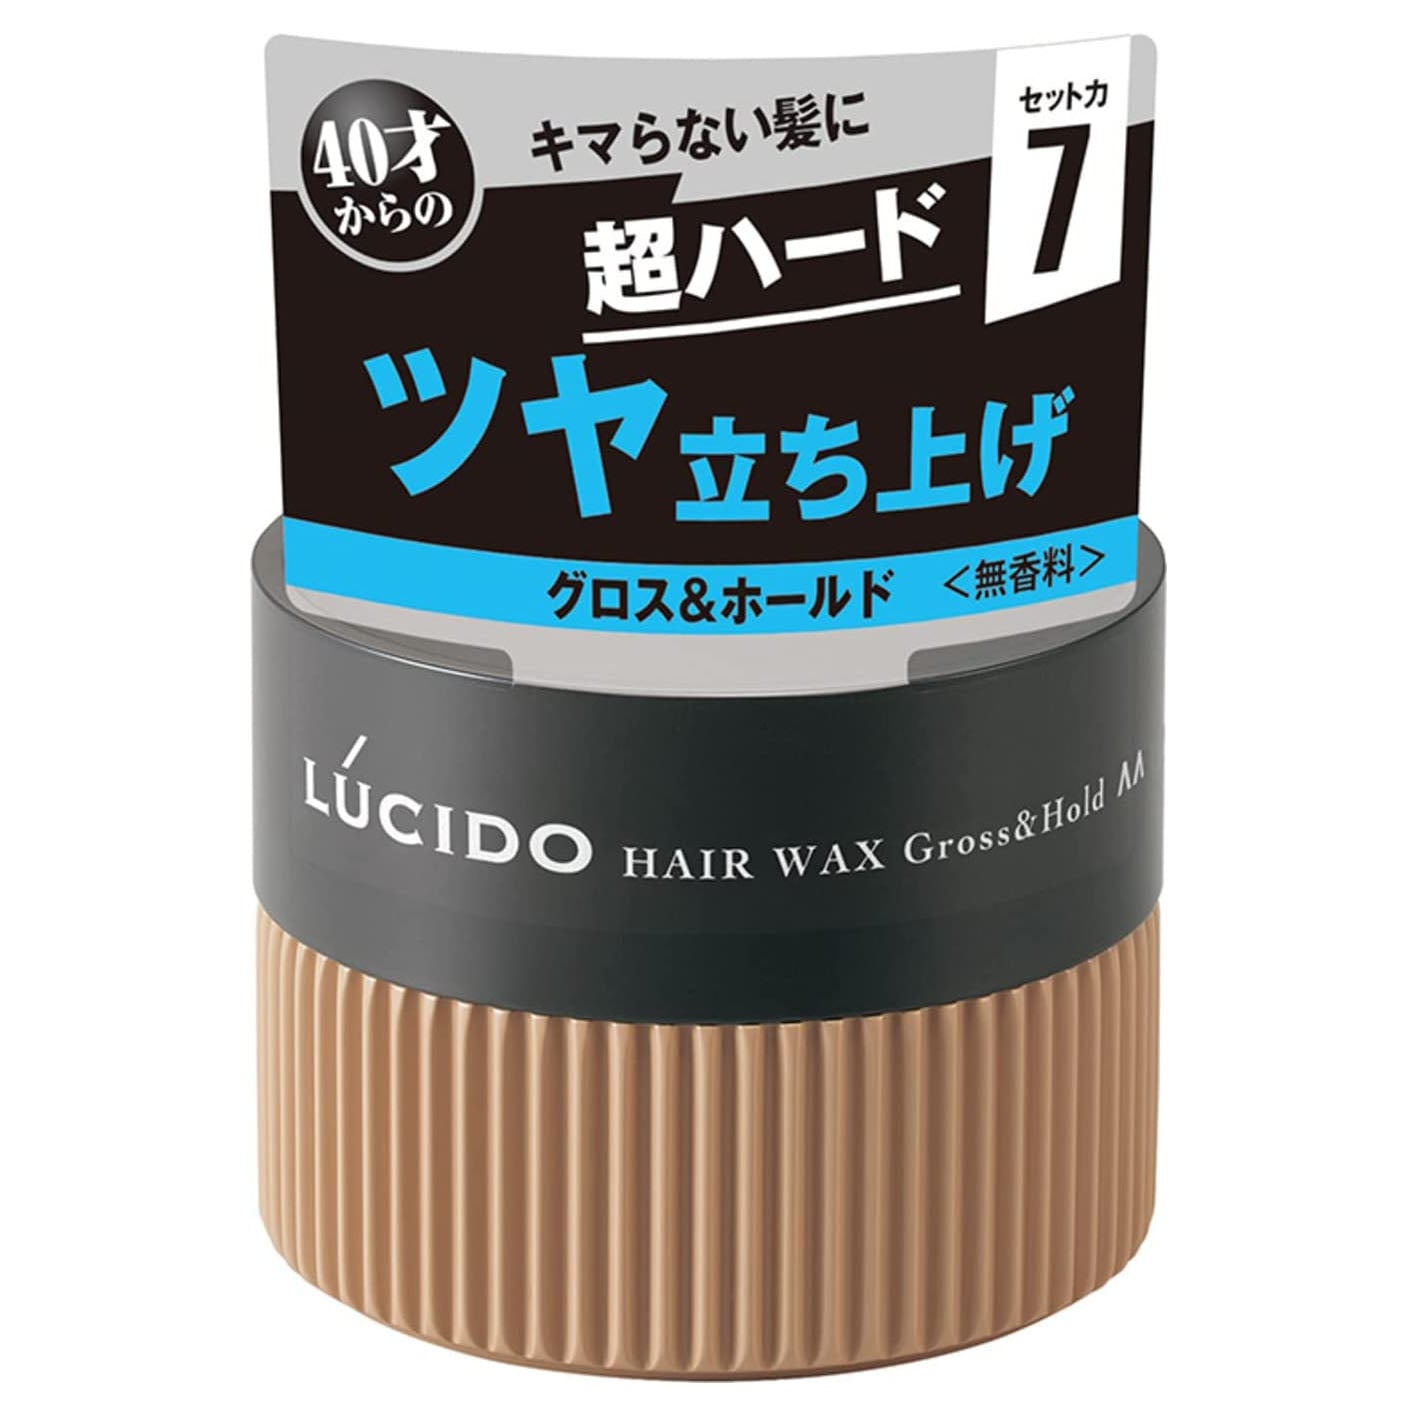 Lucido Hair Wax 80g - Gross & Hold - Harajuku Culture Japan - Japanease Products Store Beauty and Stationery